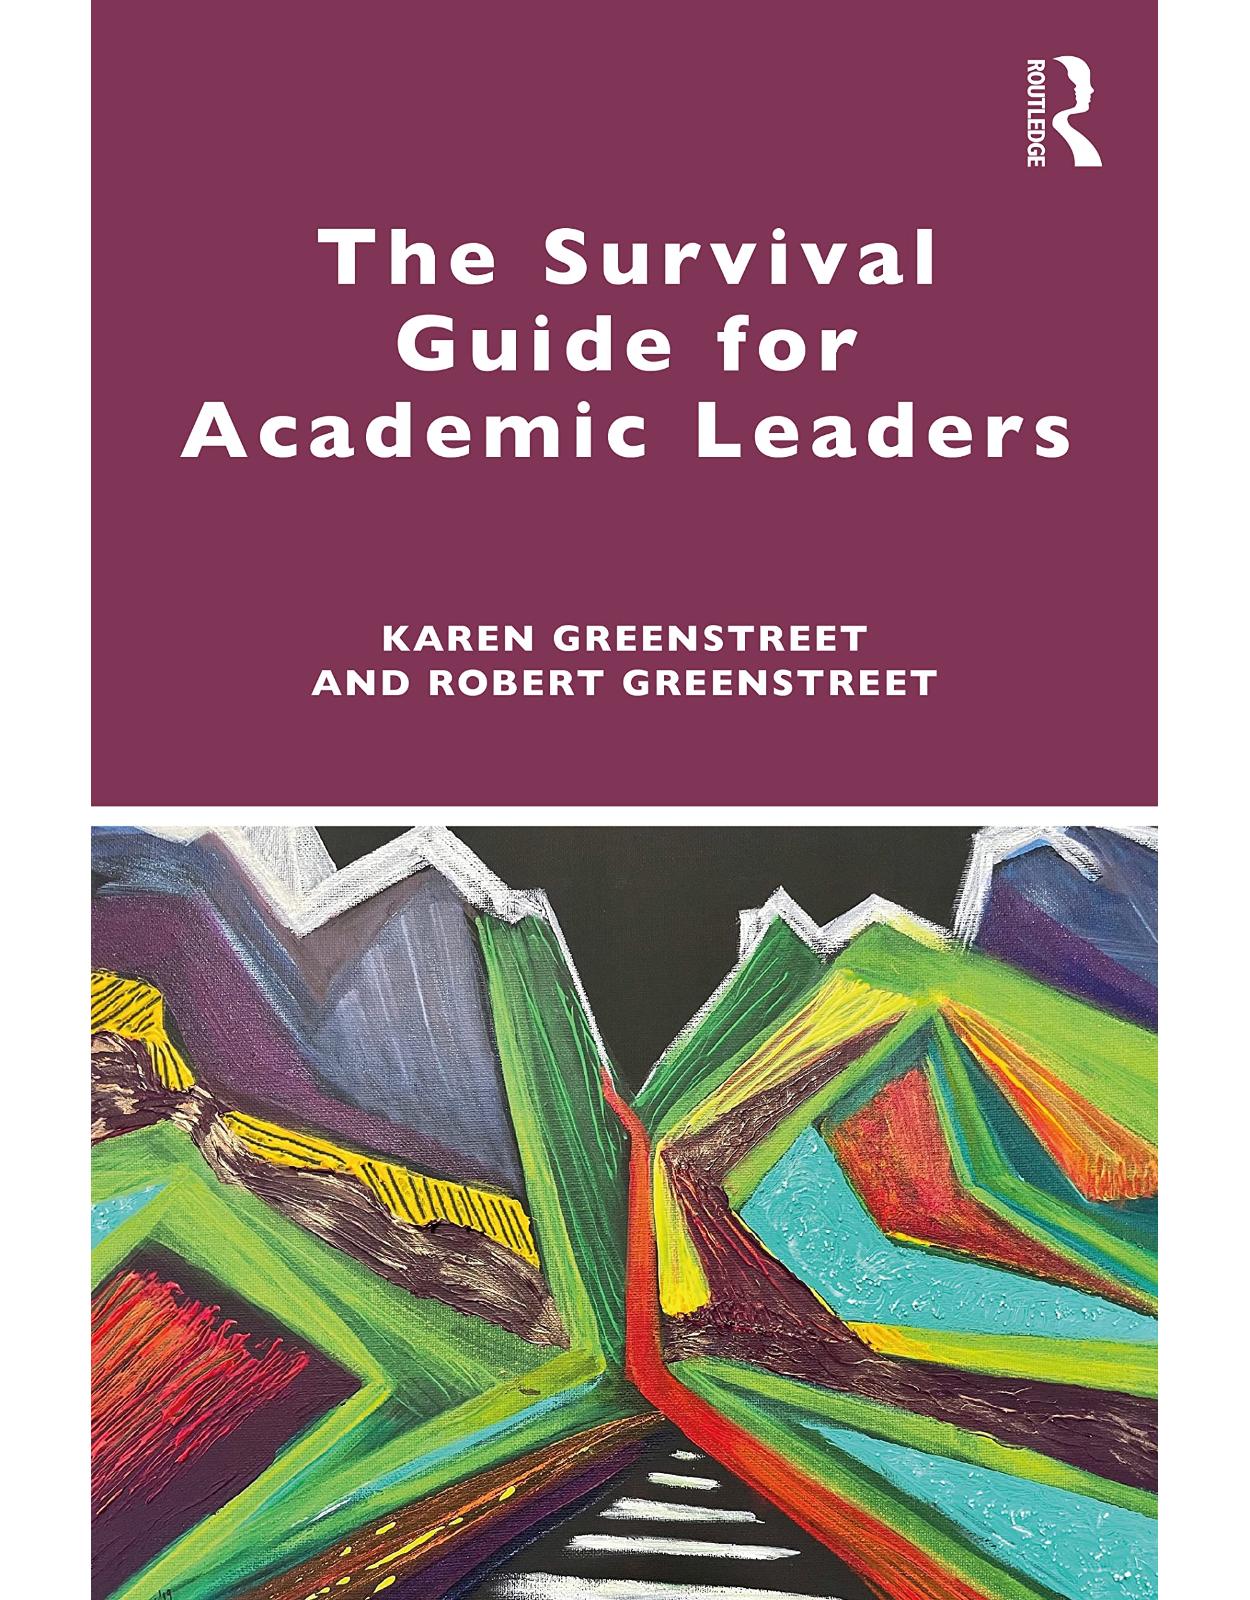 The Survival Guide for Academic Leaders